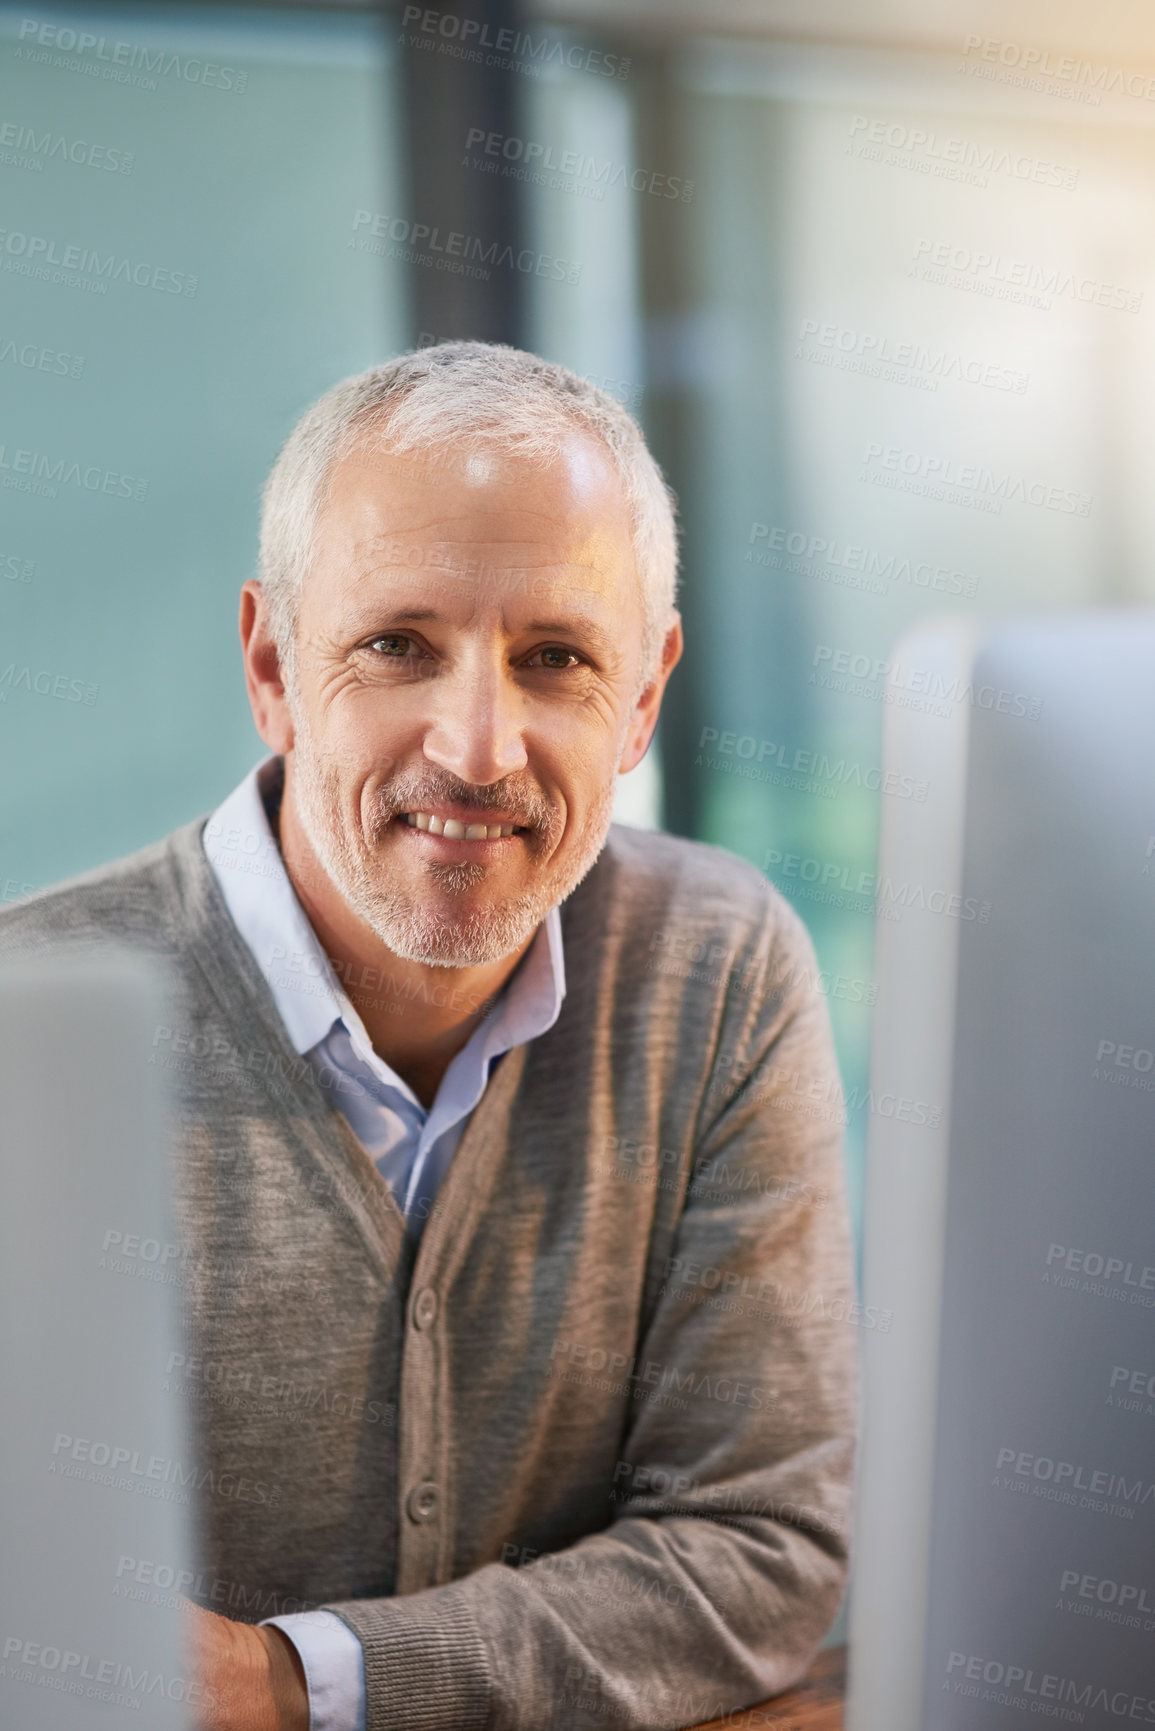 Buy stock photo Cropped portrait of a mature businessman sitting in his office